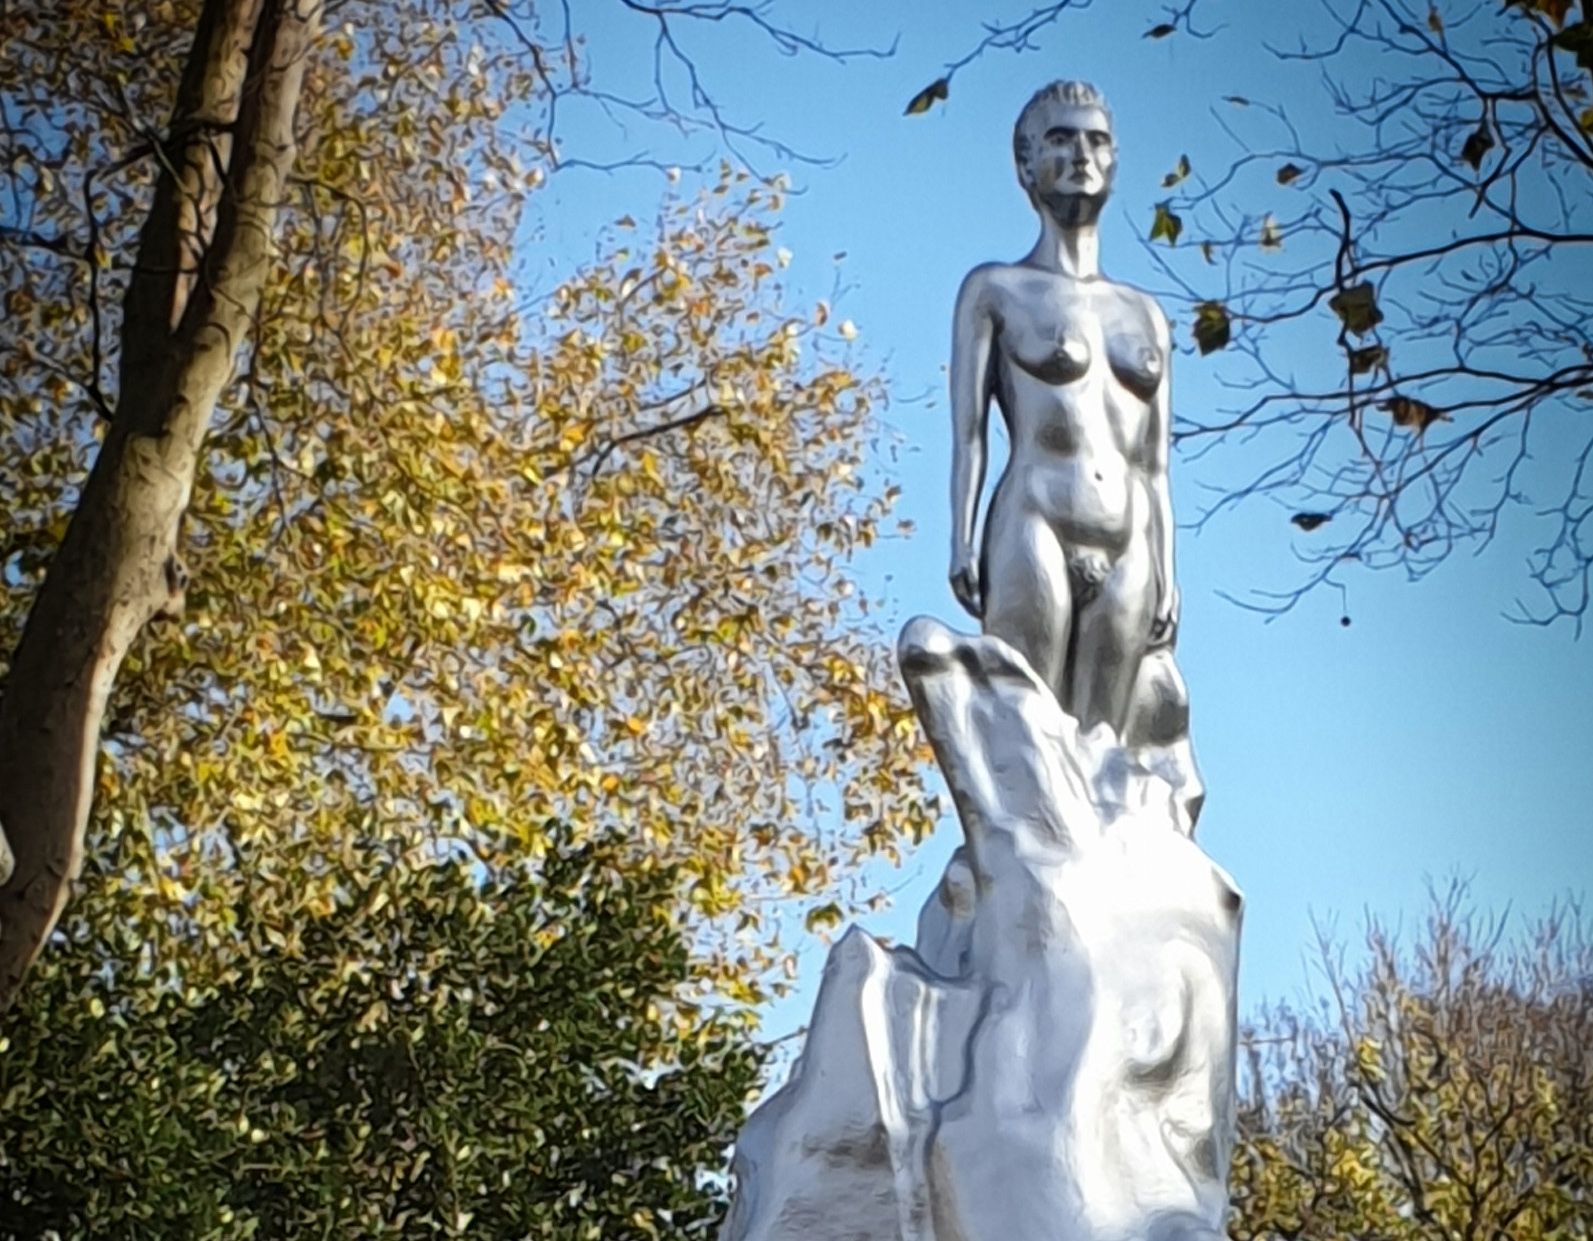 Why a naked feminist statue should remain uncensored